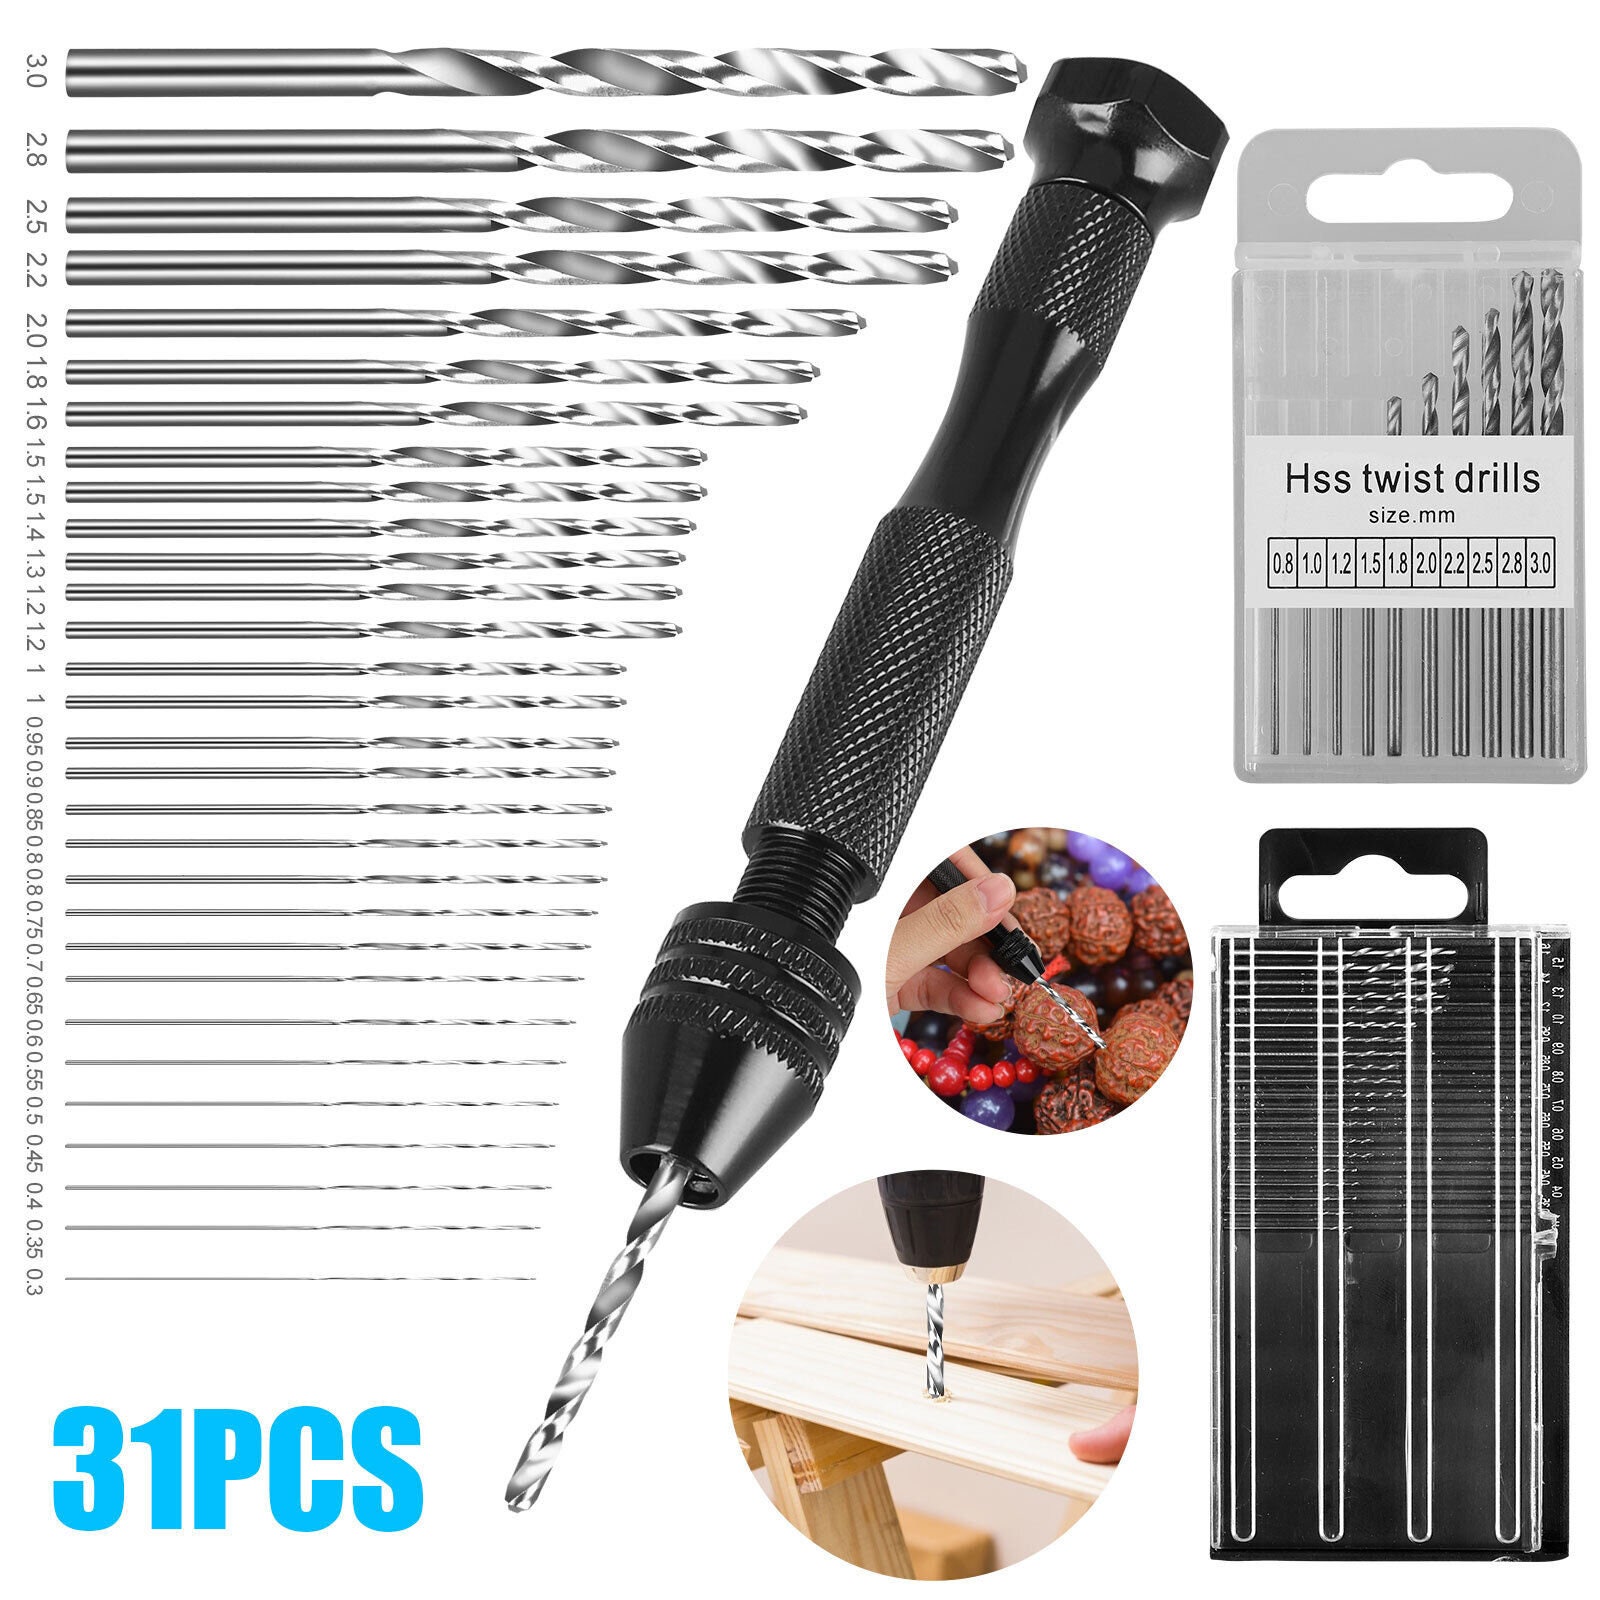 12 Piece HAND DRILL SET / Jewelry Tools / Resin Art / Crafts / Nail Art /  Chunk Handle and 0.8-3.0mm Bits With Bit Case / Manual Hole Drill 